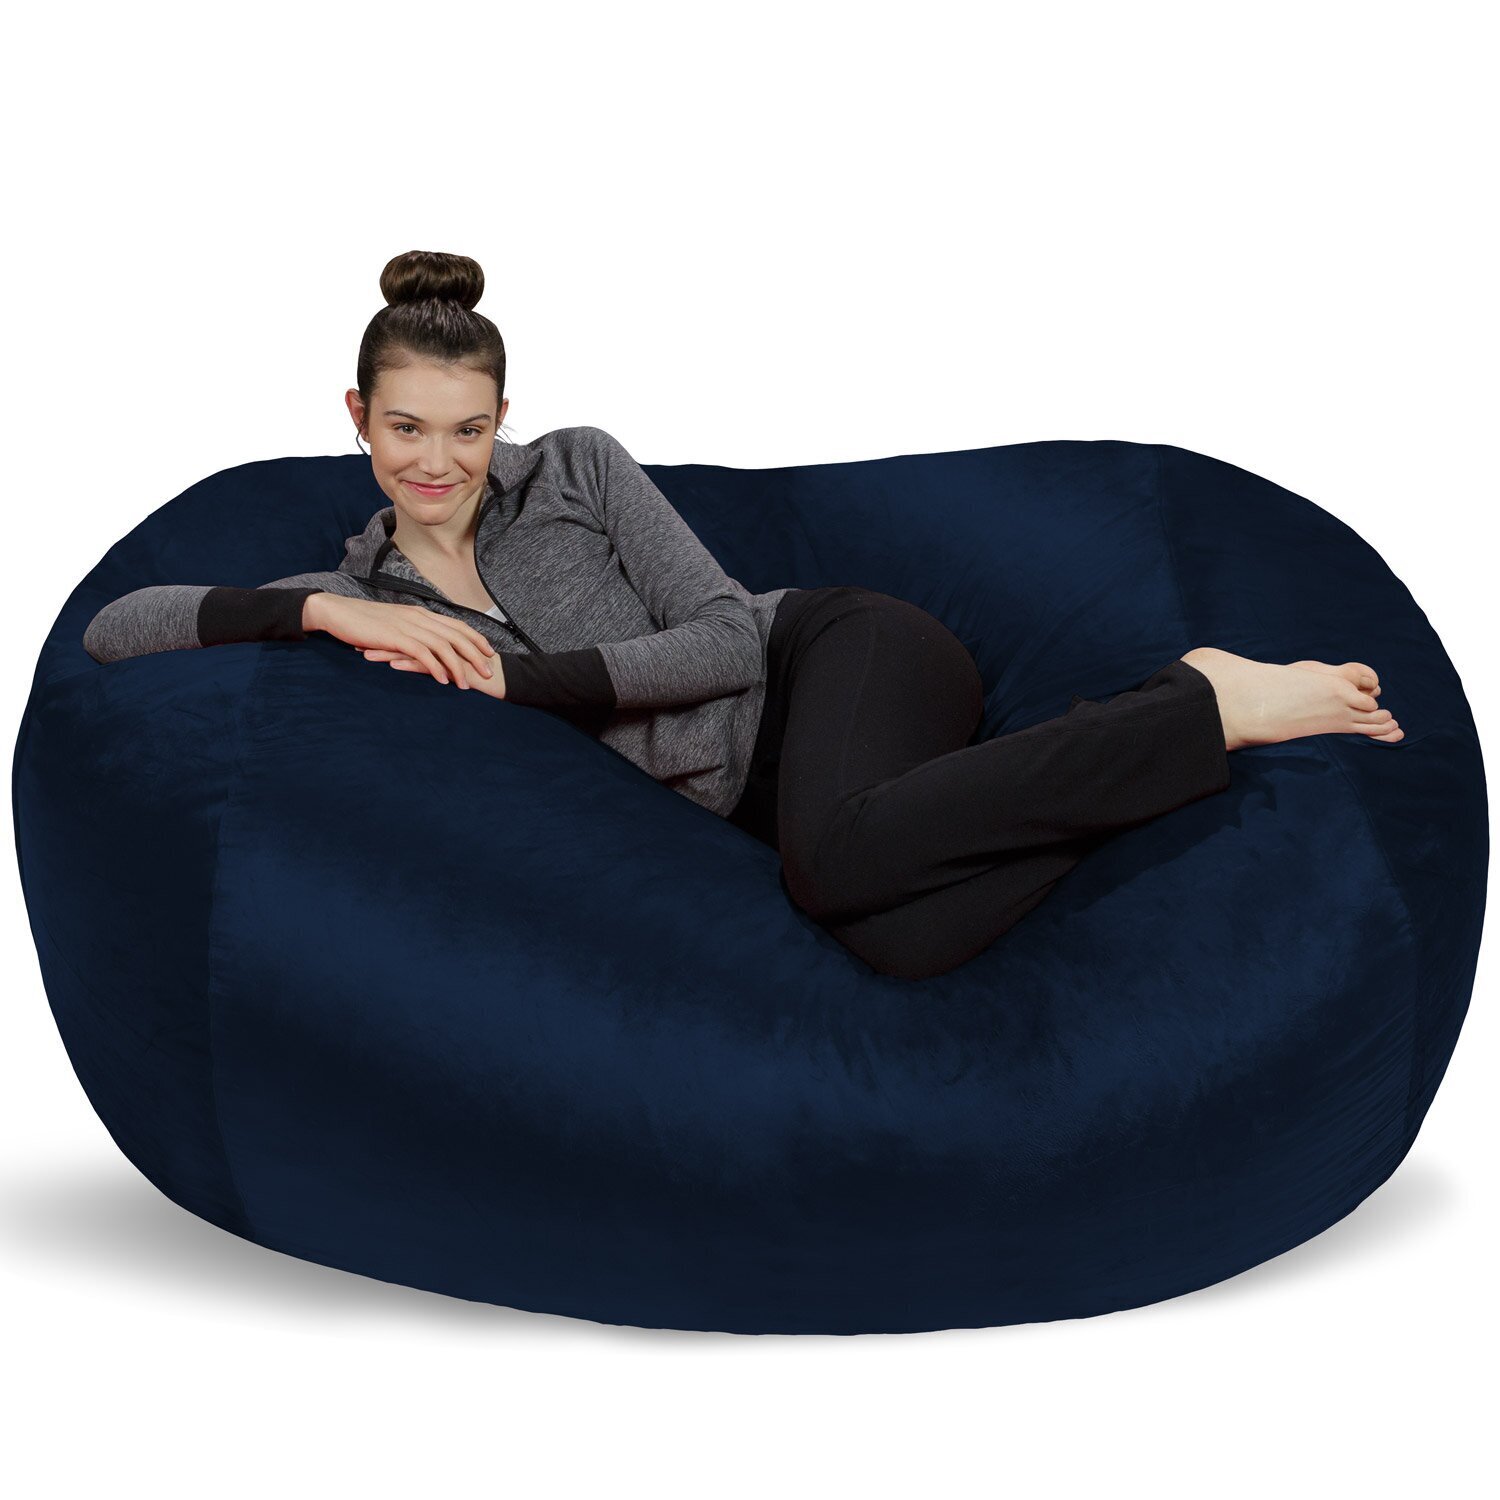 Two Seater Bean Bag